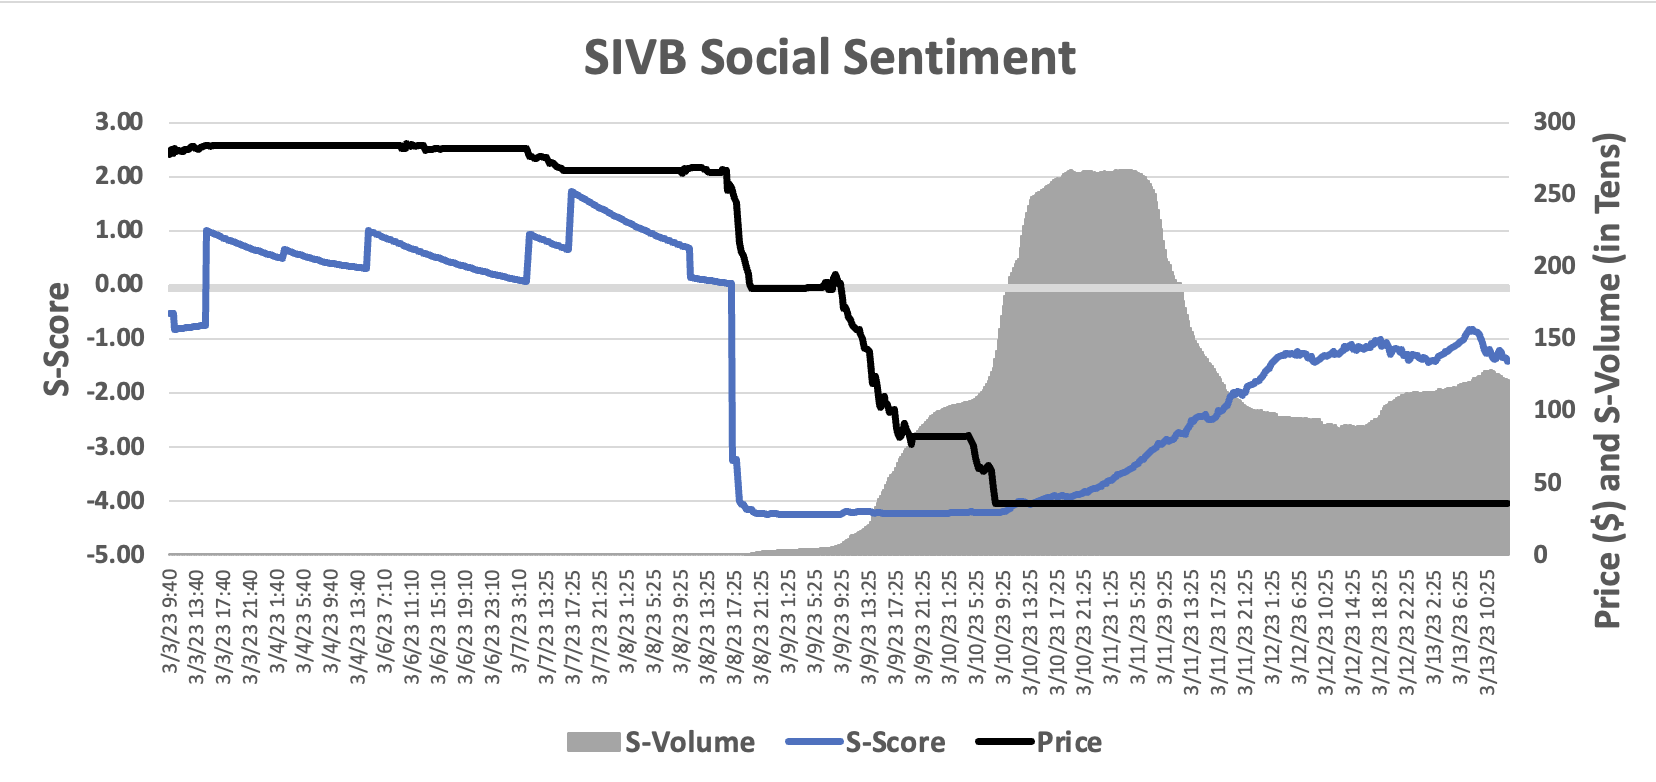 social sentiment/ twitter volume in relation to SIVB price